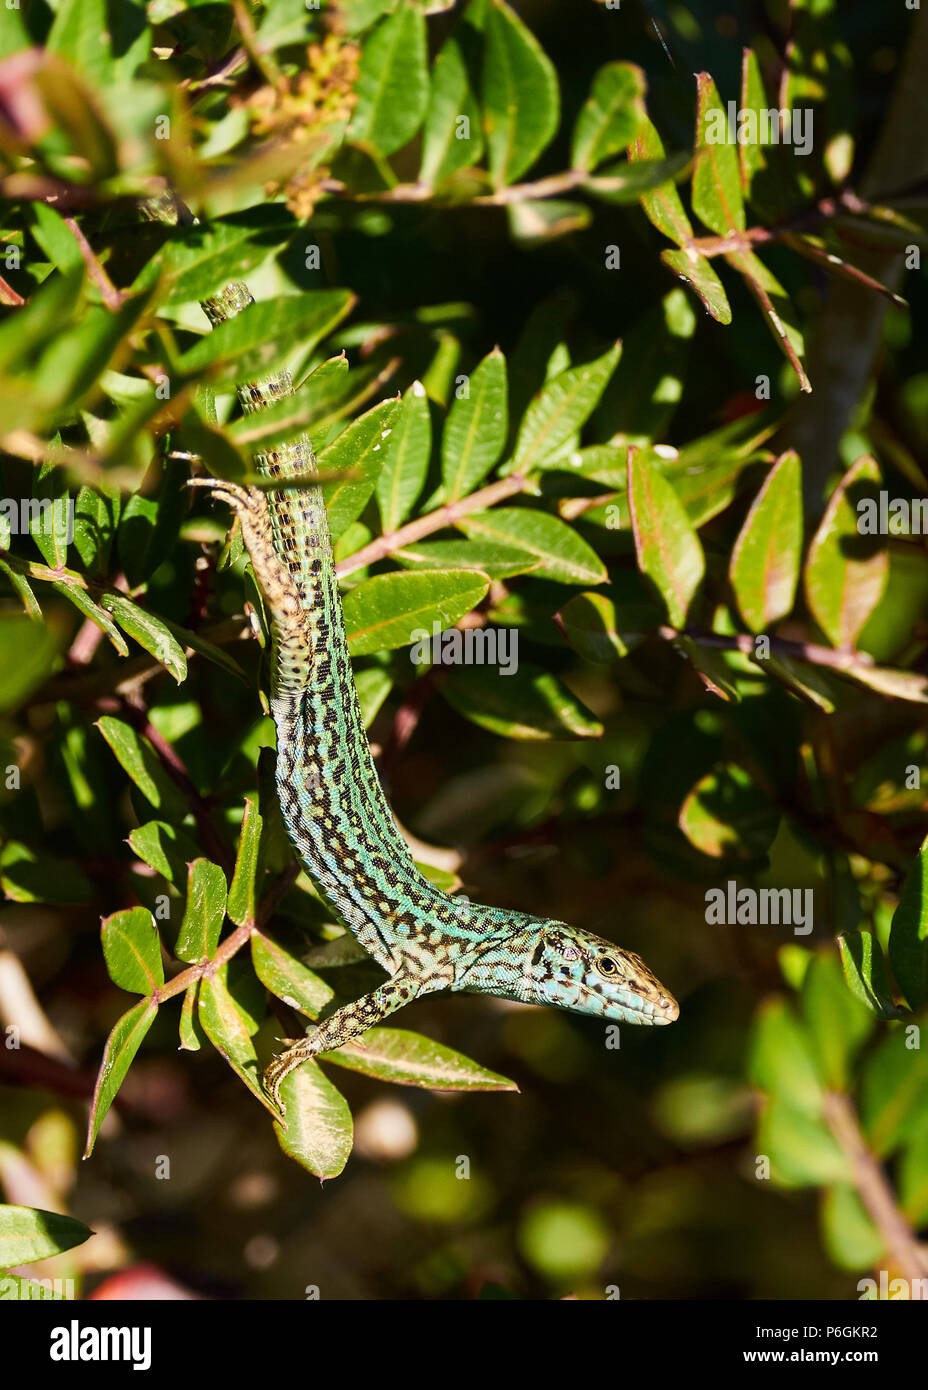 Ibiza wall lizard sub-specie (Podarcis pityusensis formenterae) hanging in a lentisk in Ses Salines Natural Park (Formentera, Balearic Islands, Spain) Stock Photo